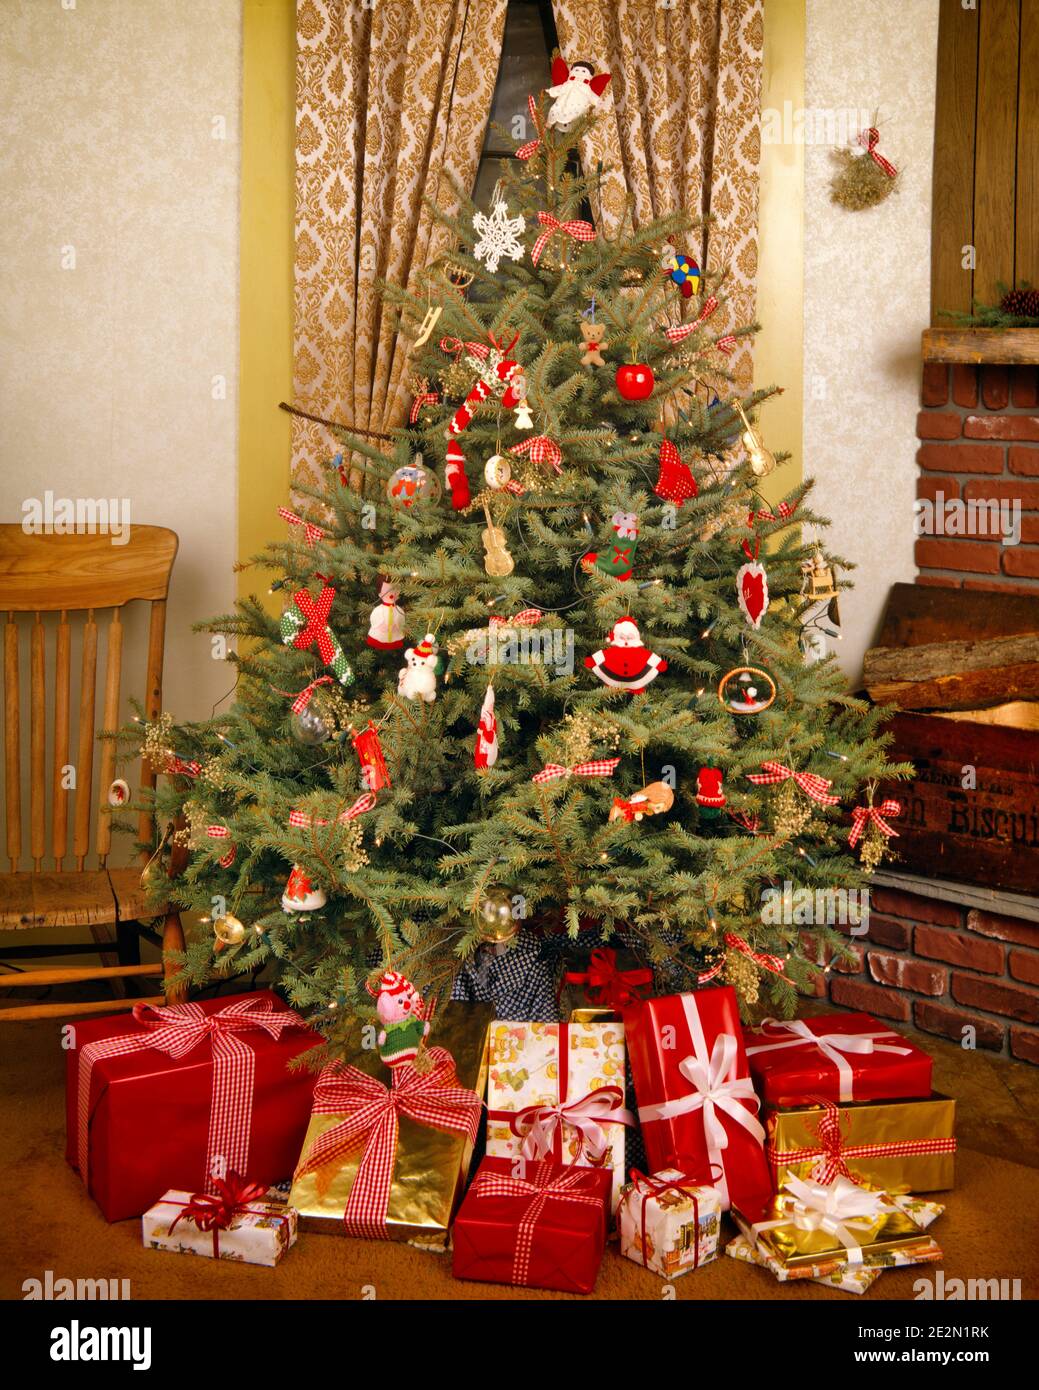 1980s SIMPLE EVERGREEN CHRISTMAS TREE DECORATED WITH HOMEMADE AND HANDMADE ORNAMENTS WRAPPED GIFTS AND PRESENTS AROUND THE BASE - kx9752 TEU001 HARS JOYOUS RELAXATION TOGETHERNESS HANDMADE OLD FASHIONED Stock Photo